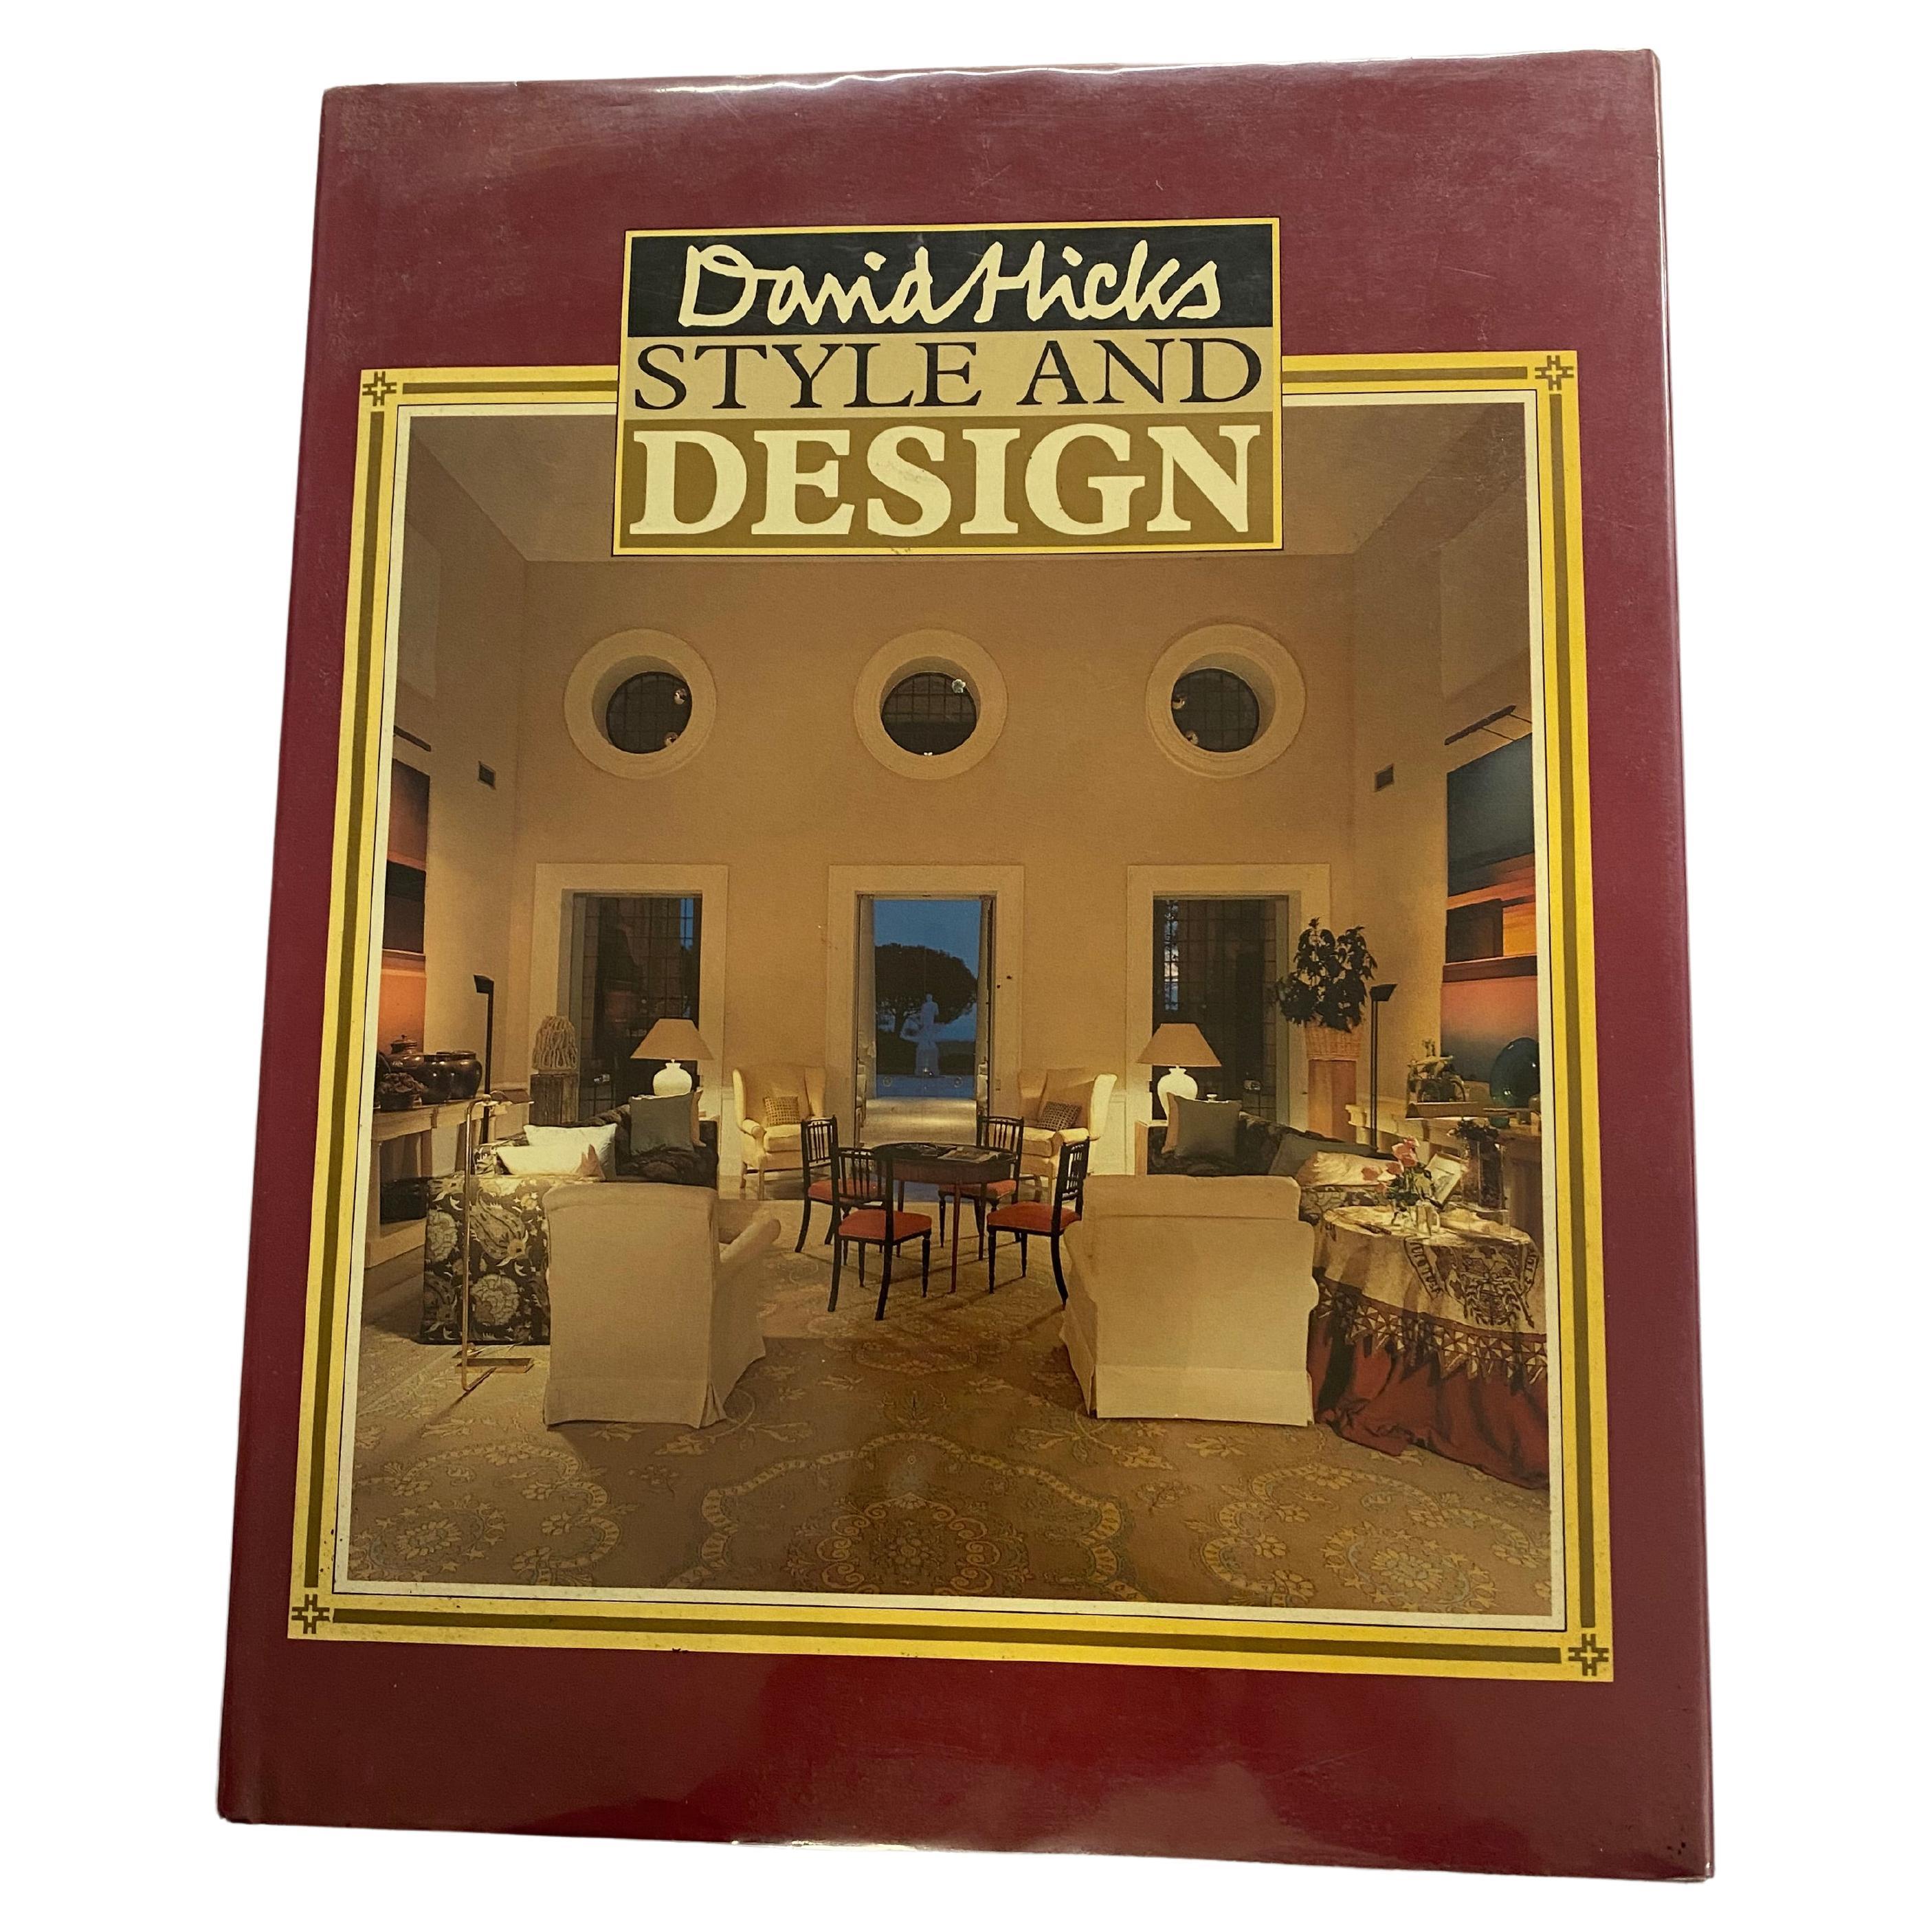 Style and Design by David Hicks (Book) For Sale